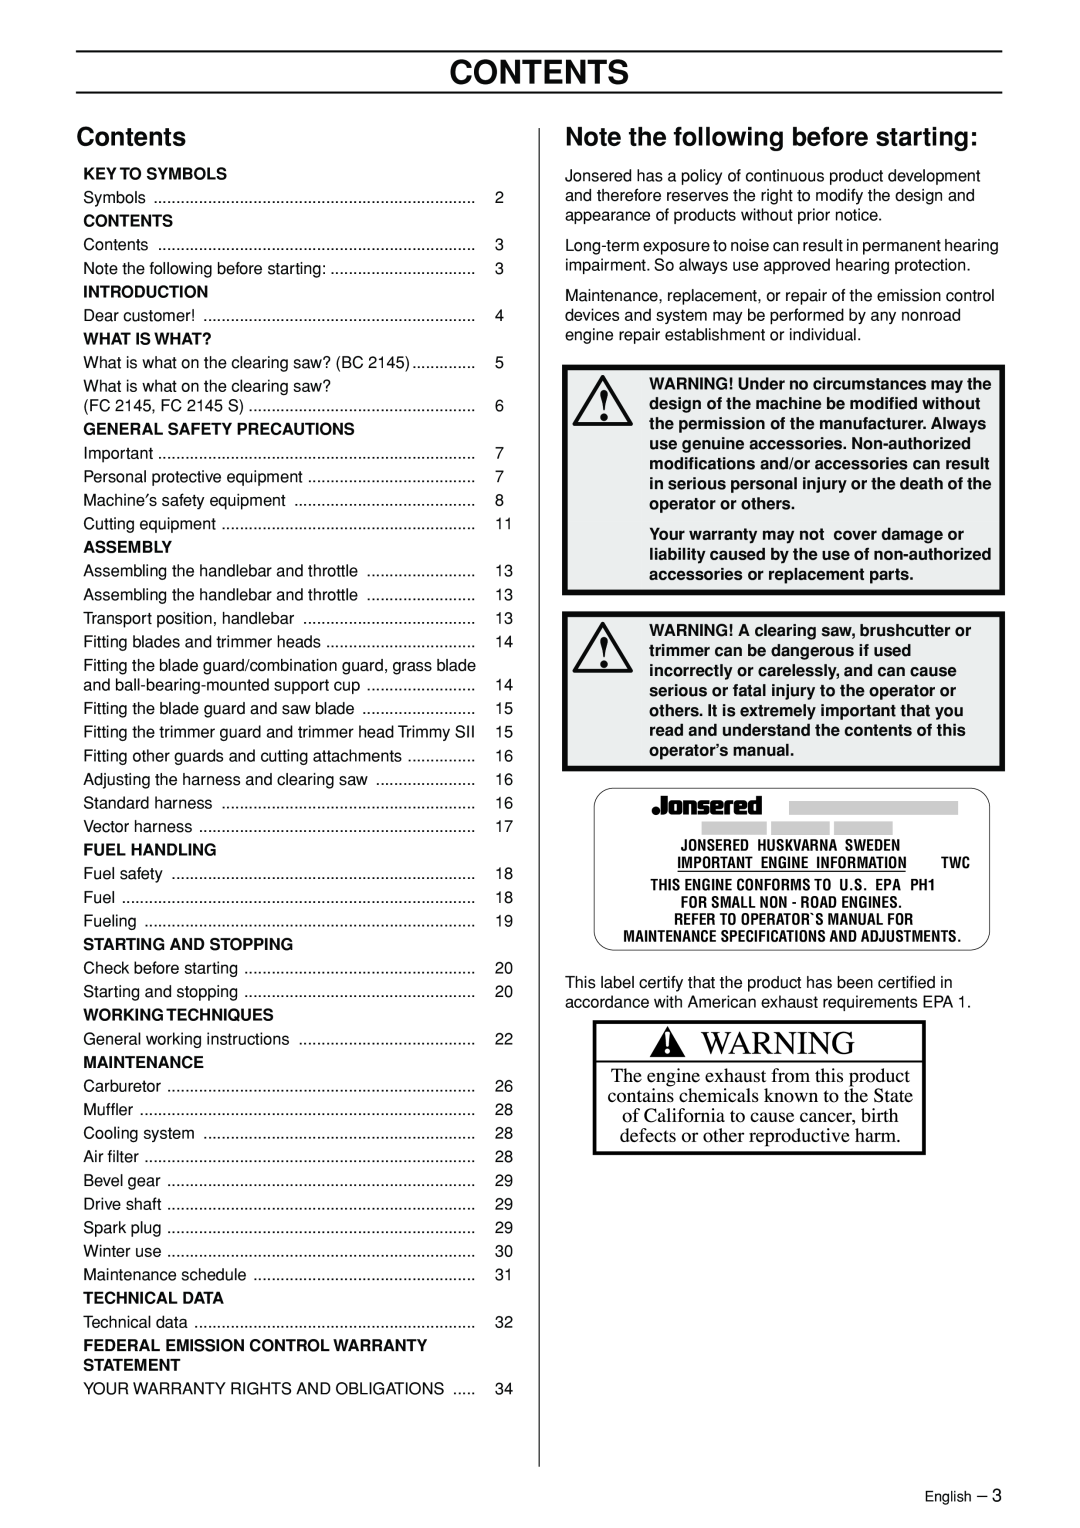 Jonsered FC 2145 manual Contents, Note the following before starting, Key To Symbols, Introduction, What Is What?, Assembly 